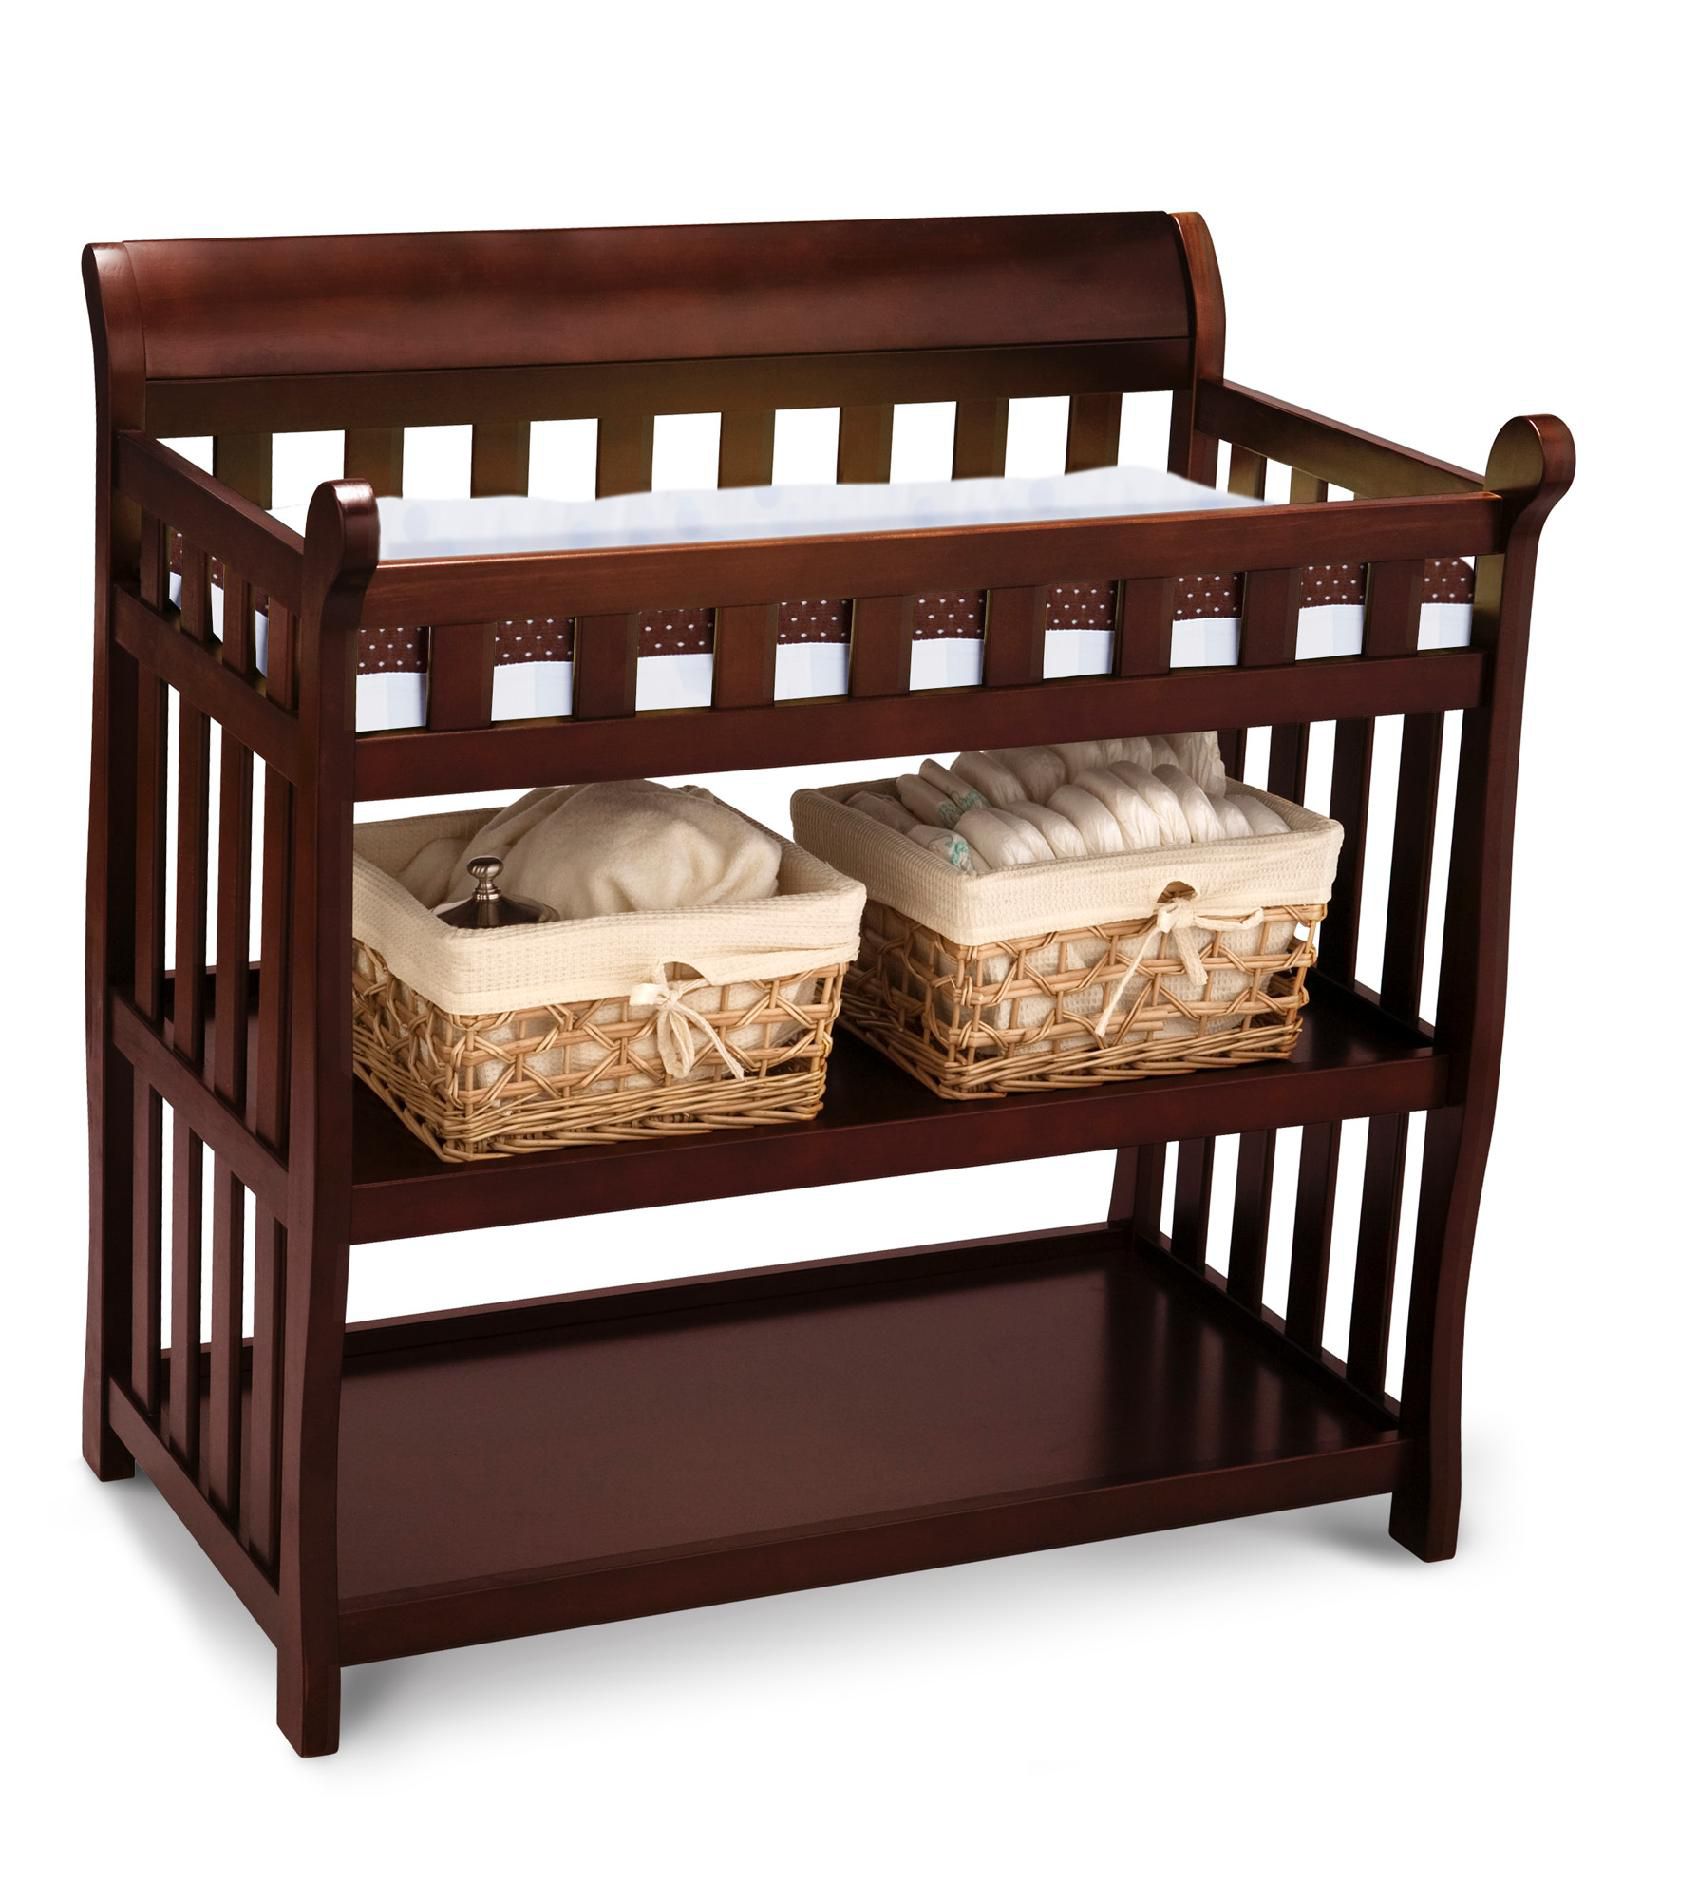 ECLIPSE CHANGING TABLE-Black cherry